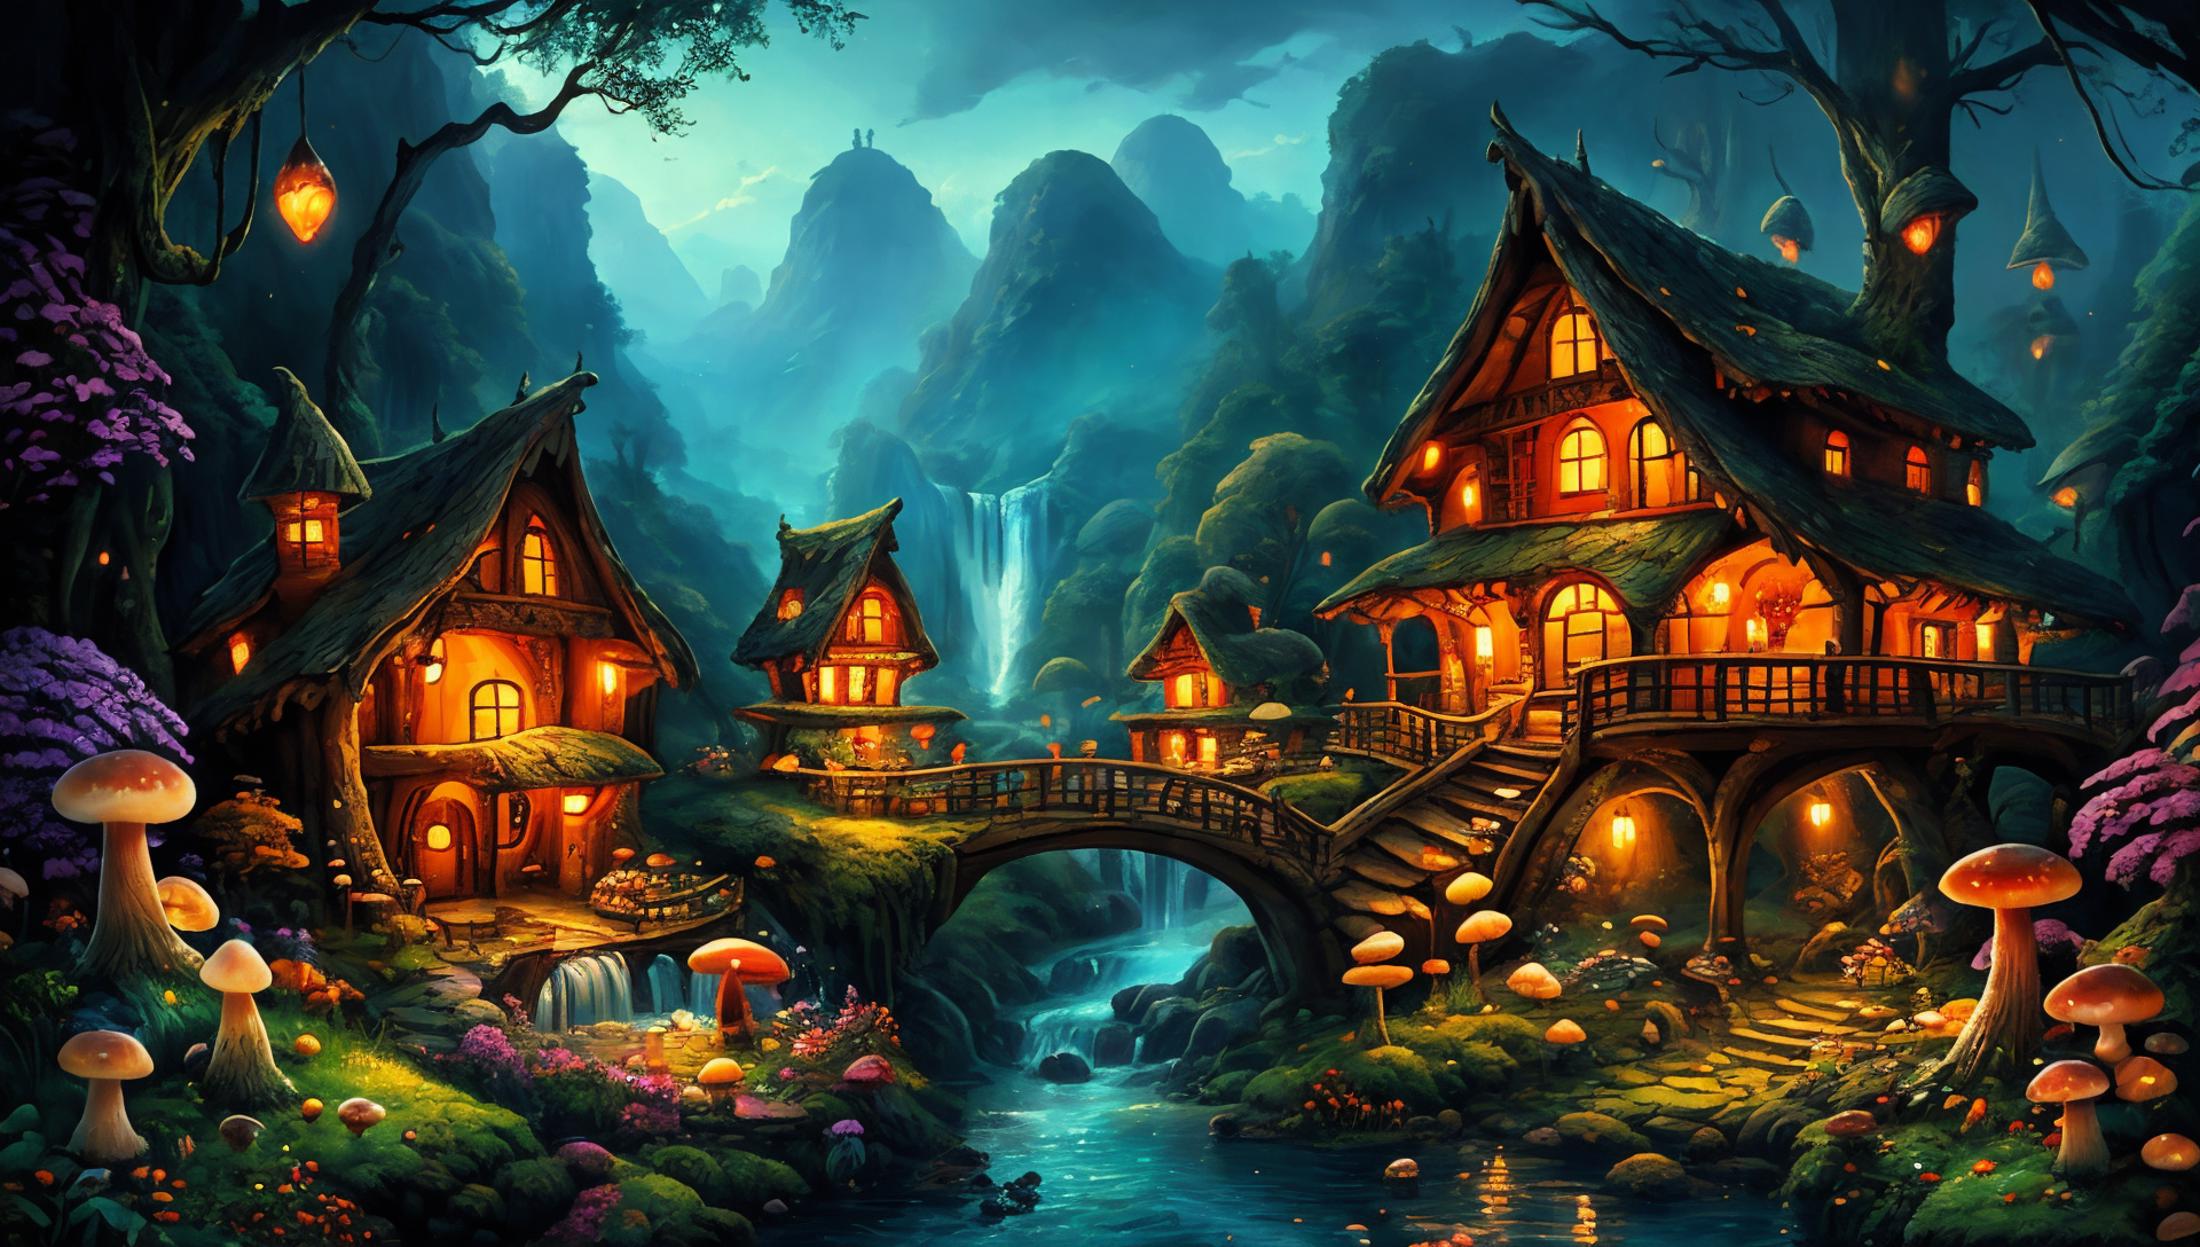 Magical Forest Home image by Inland389